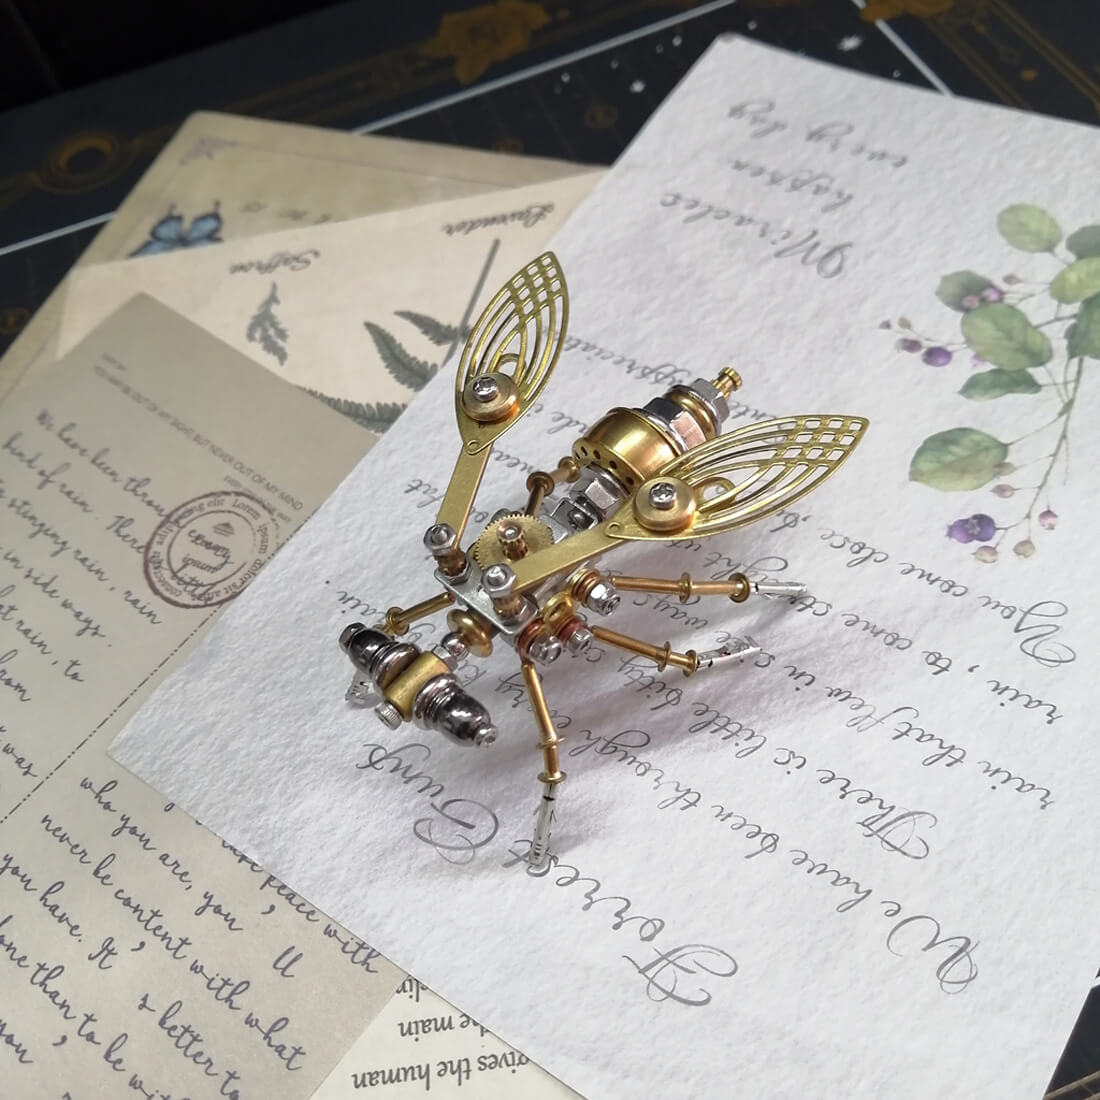 Miniature Steampunk Brass Fruit Fly Spider Ant Dragonfly Butterfly Metal Model Kits